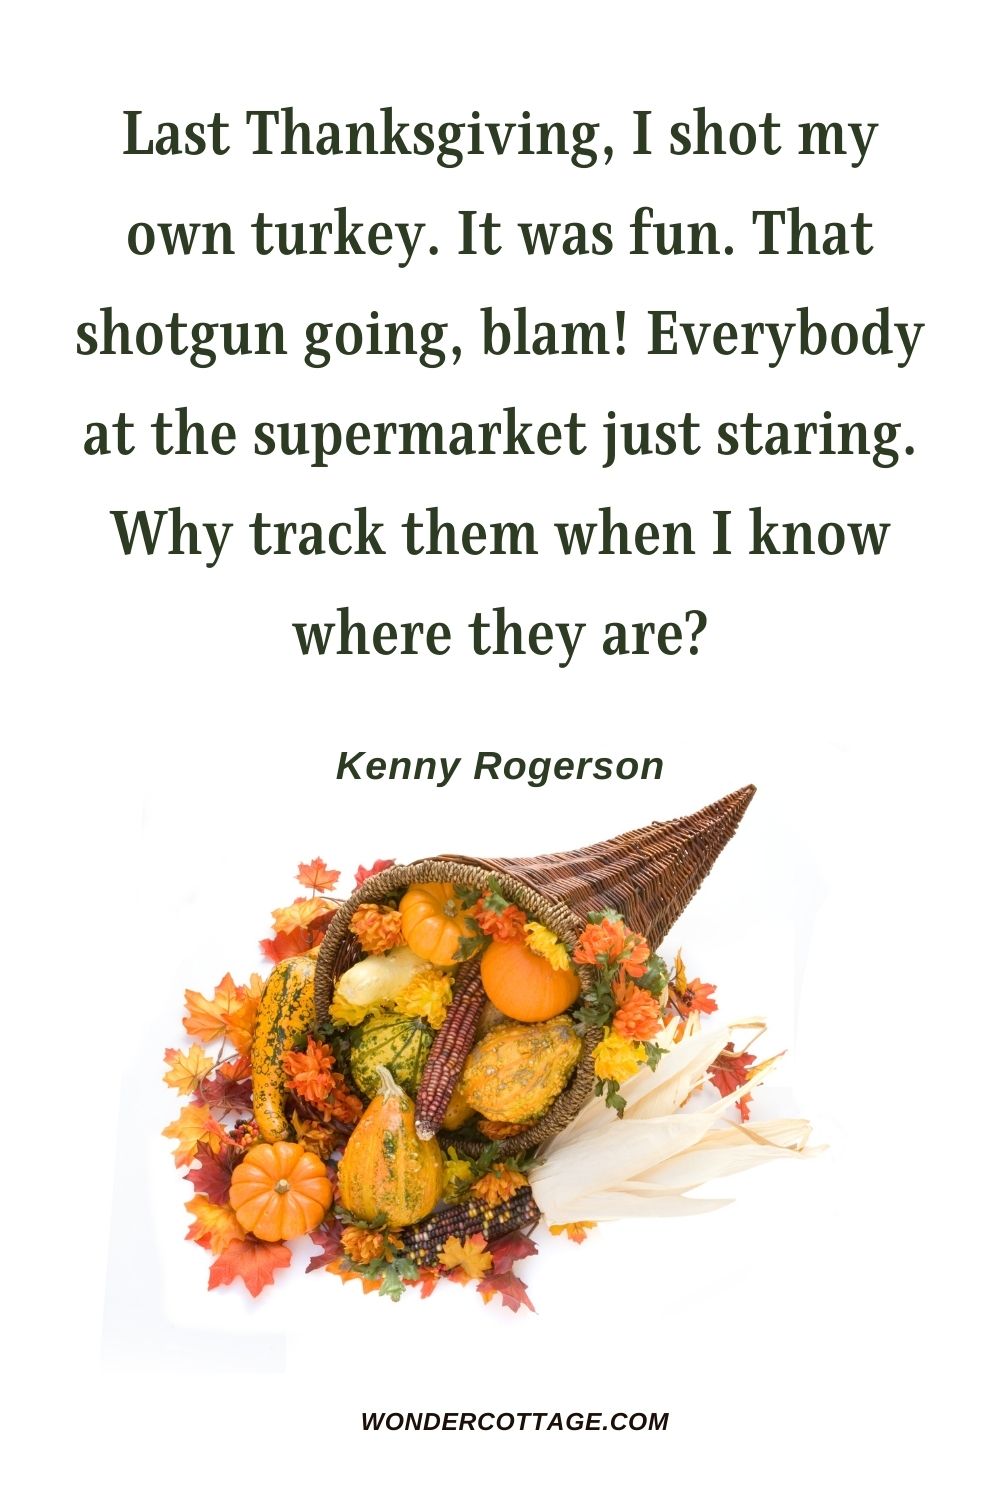 Last Thanksgiving, I shot my own turkey. It was fun. That shotgun going, blam! Everybody at the supermarket just staring. Why track them when I know where they are? Kenny Rogerson